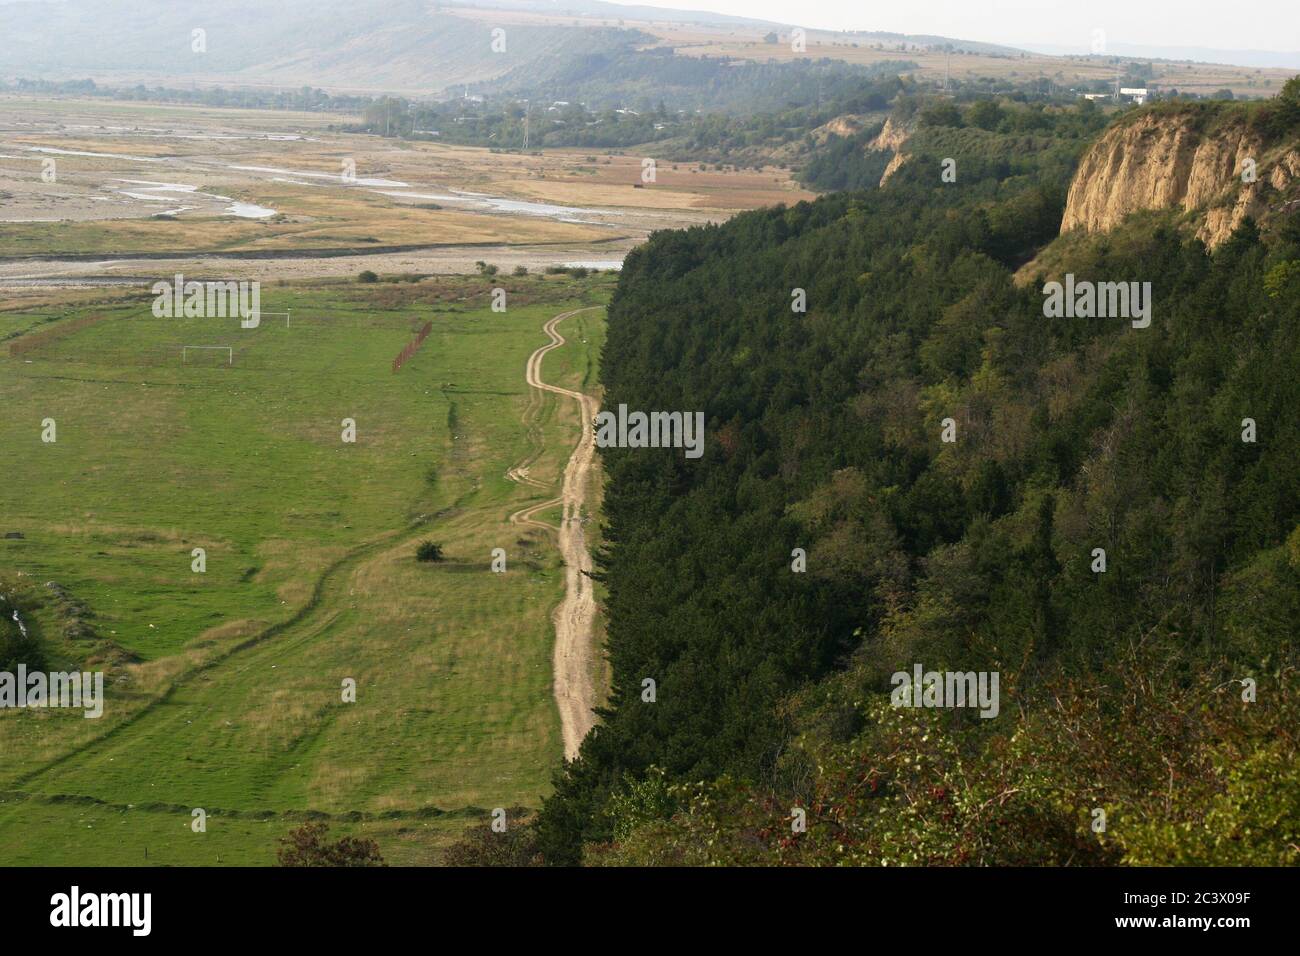 Cliffs along the Putna river in Vrancea County, Romania. Dirt road in the valley. Stock Photo